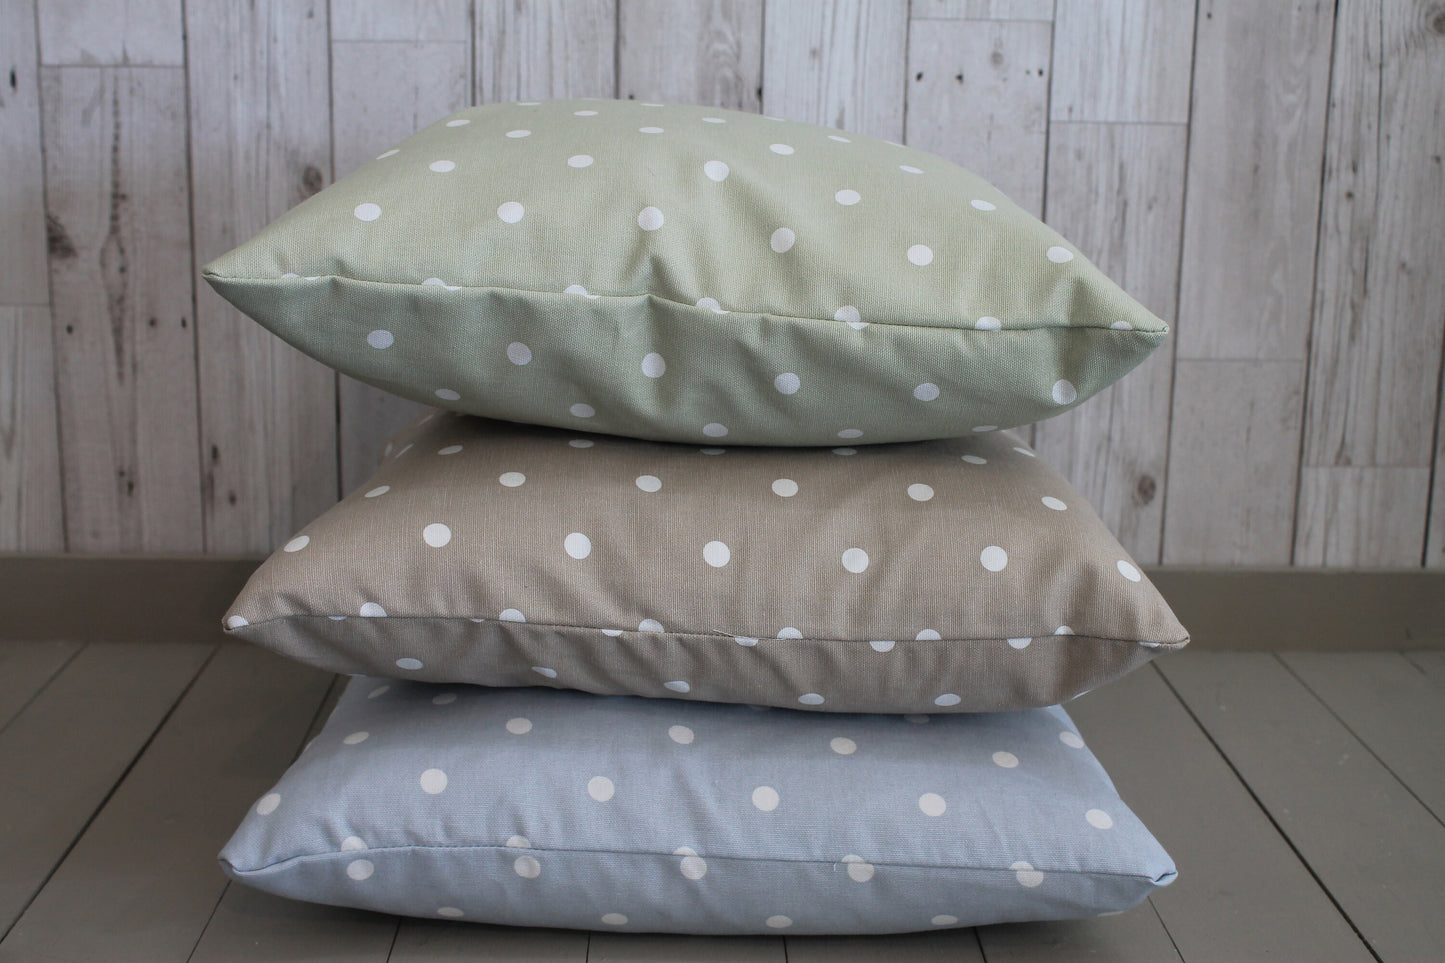 Sage Dotty Cushion 14" x 14" Scatter Cushion-Throw Cushion Polka Dot Cushion -Shabby Chic-cottage chic-Decorative pillow - Scatter pillow,